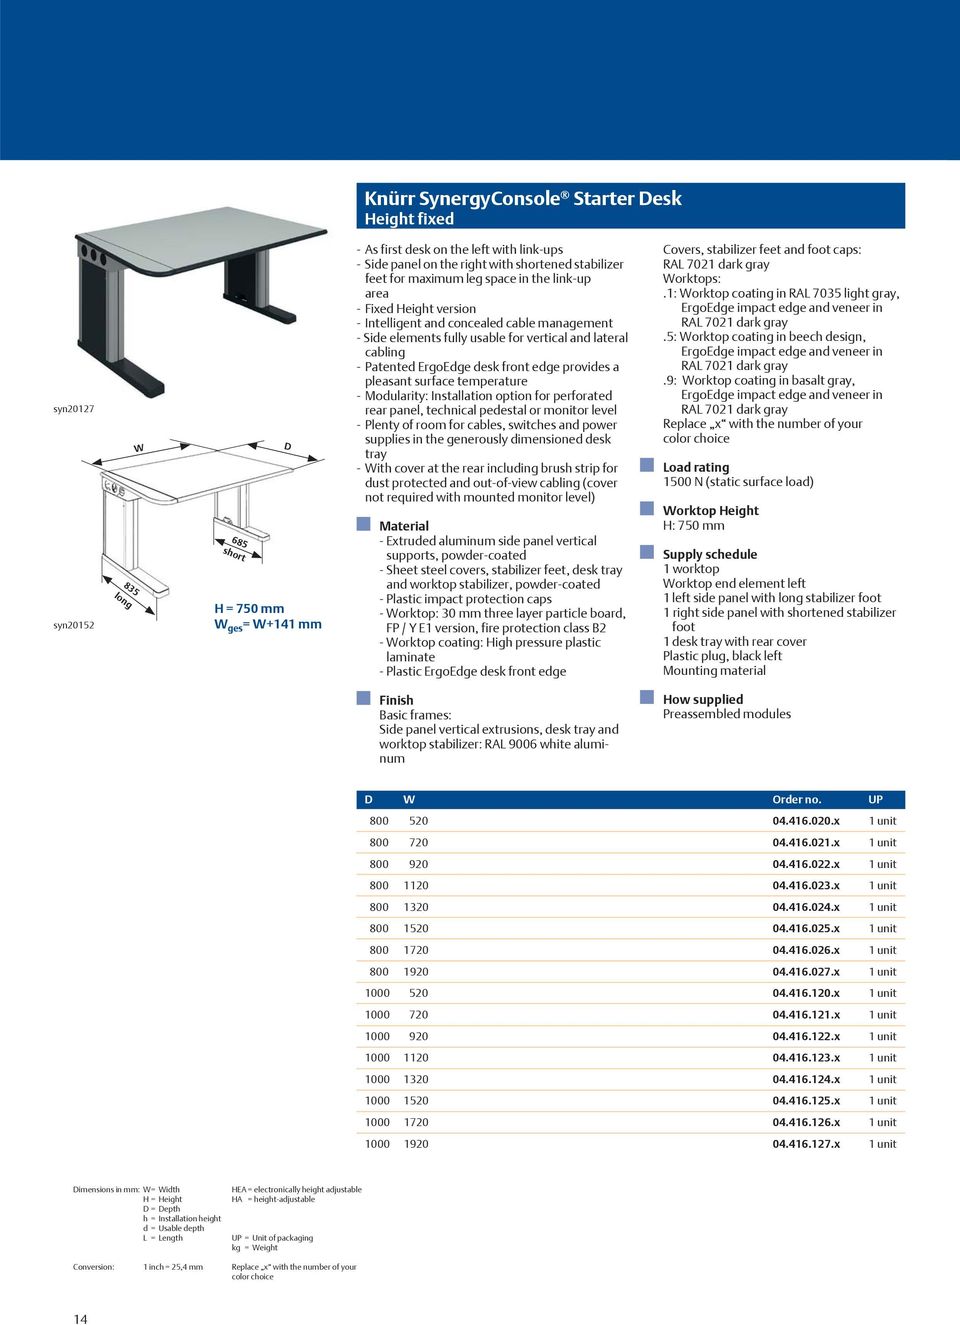 ErgoEdge desk front edge provides a pleasant surface temperature - Modularity: Installation option for perforated rear panel, technical pedestal or monitor level - Plenty of room for cables, switches